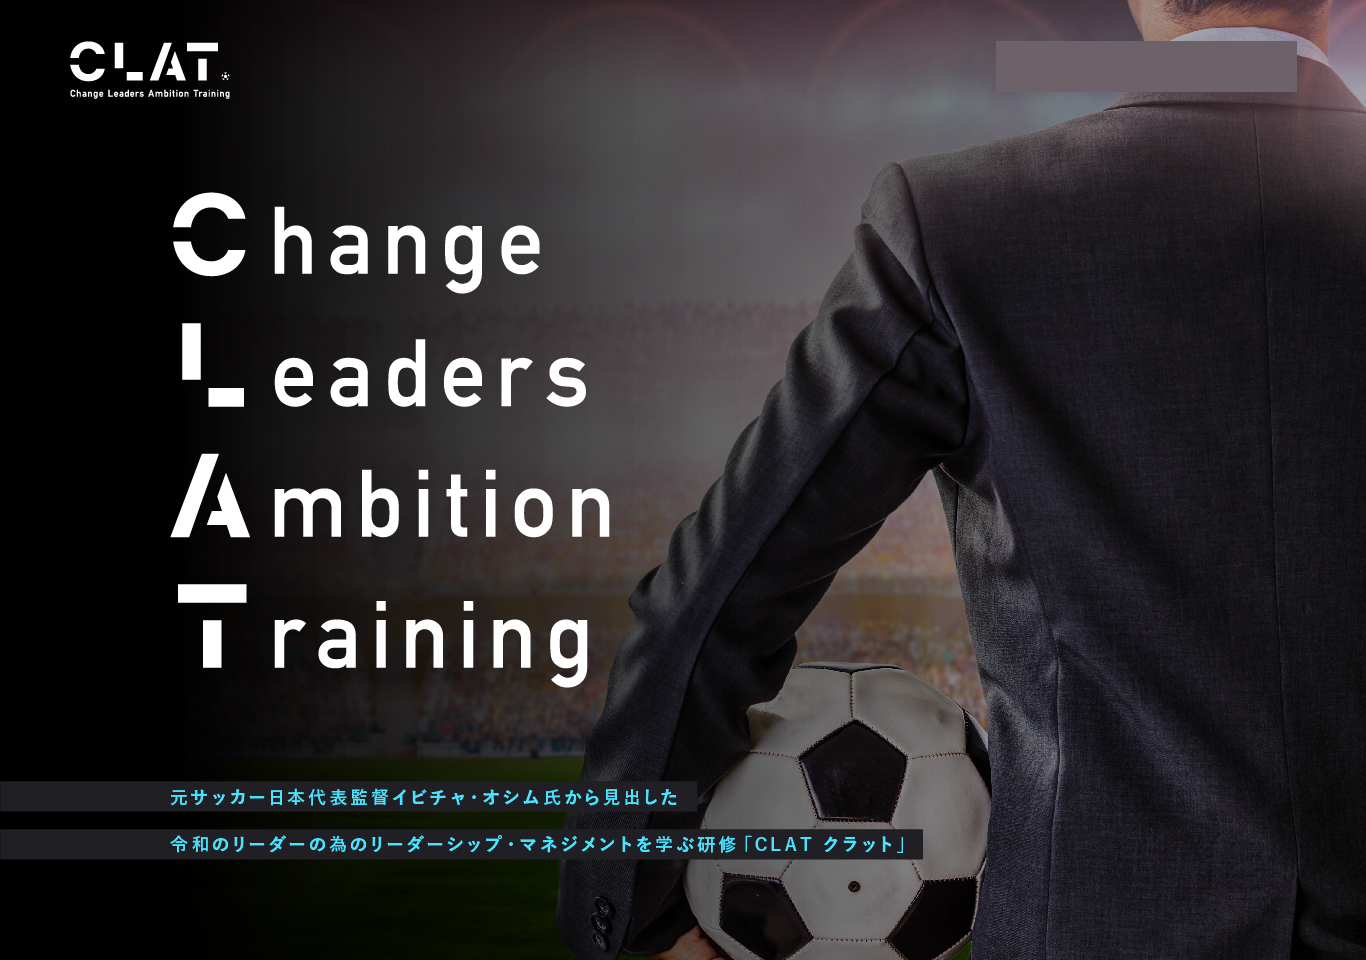 CLAT - Change Leaders Ambition Training